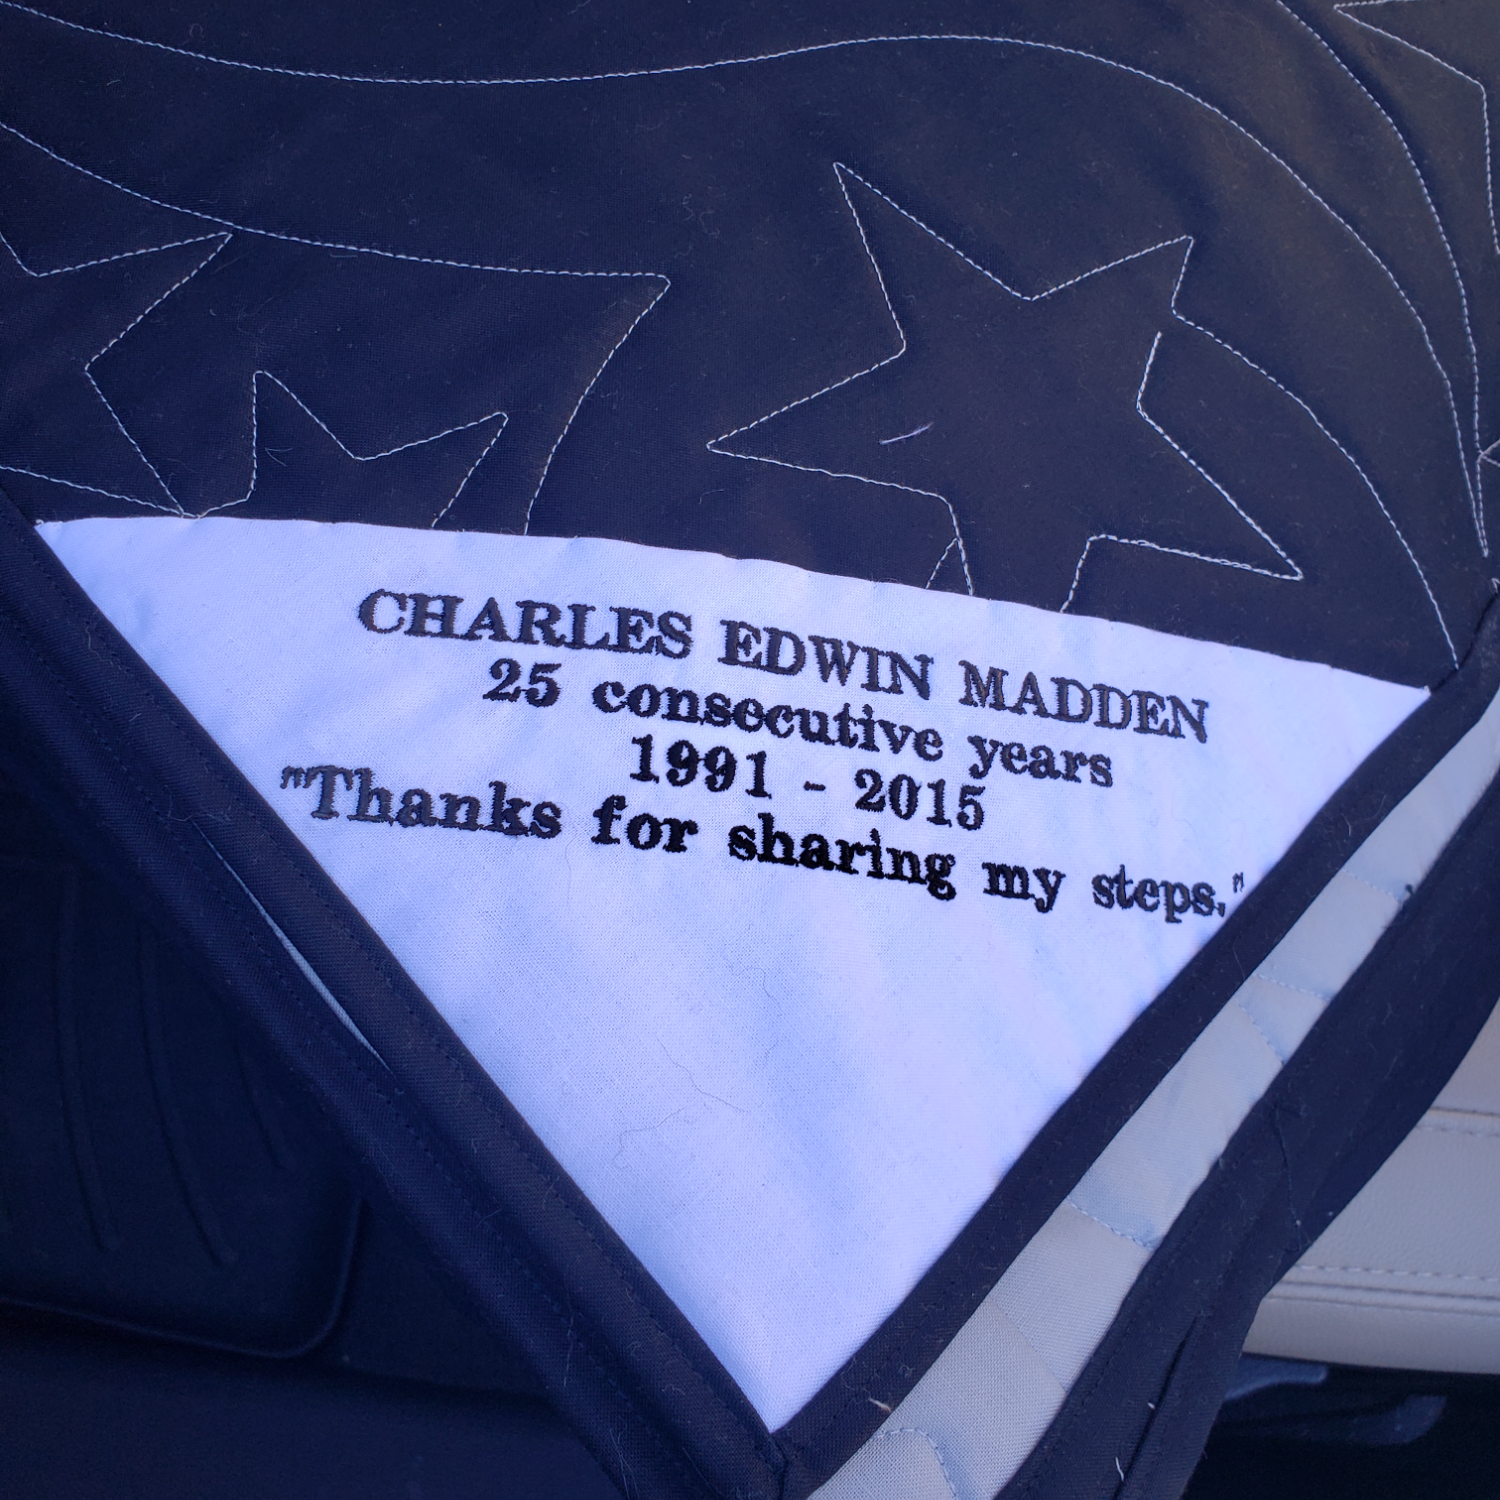 The back of the quilt reading &quot;Charles Edwin Madden 25 Consecutive Years 1991-2015 Thanks for sharing my steps.&quot;